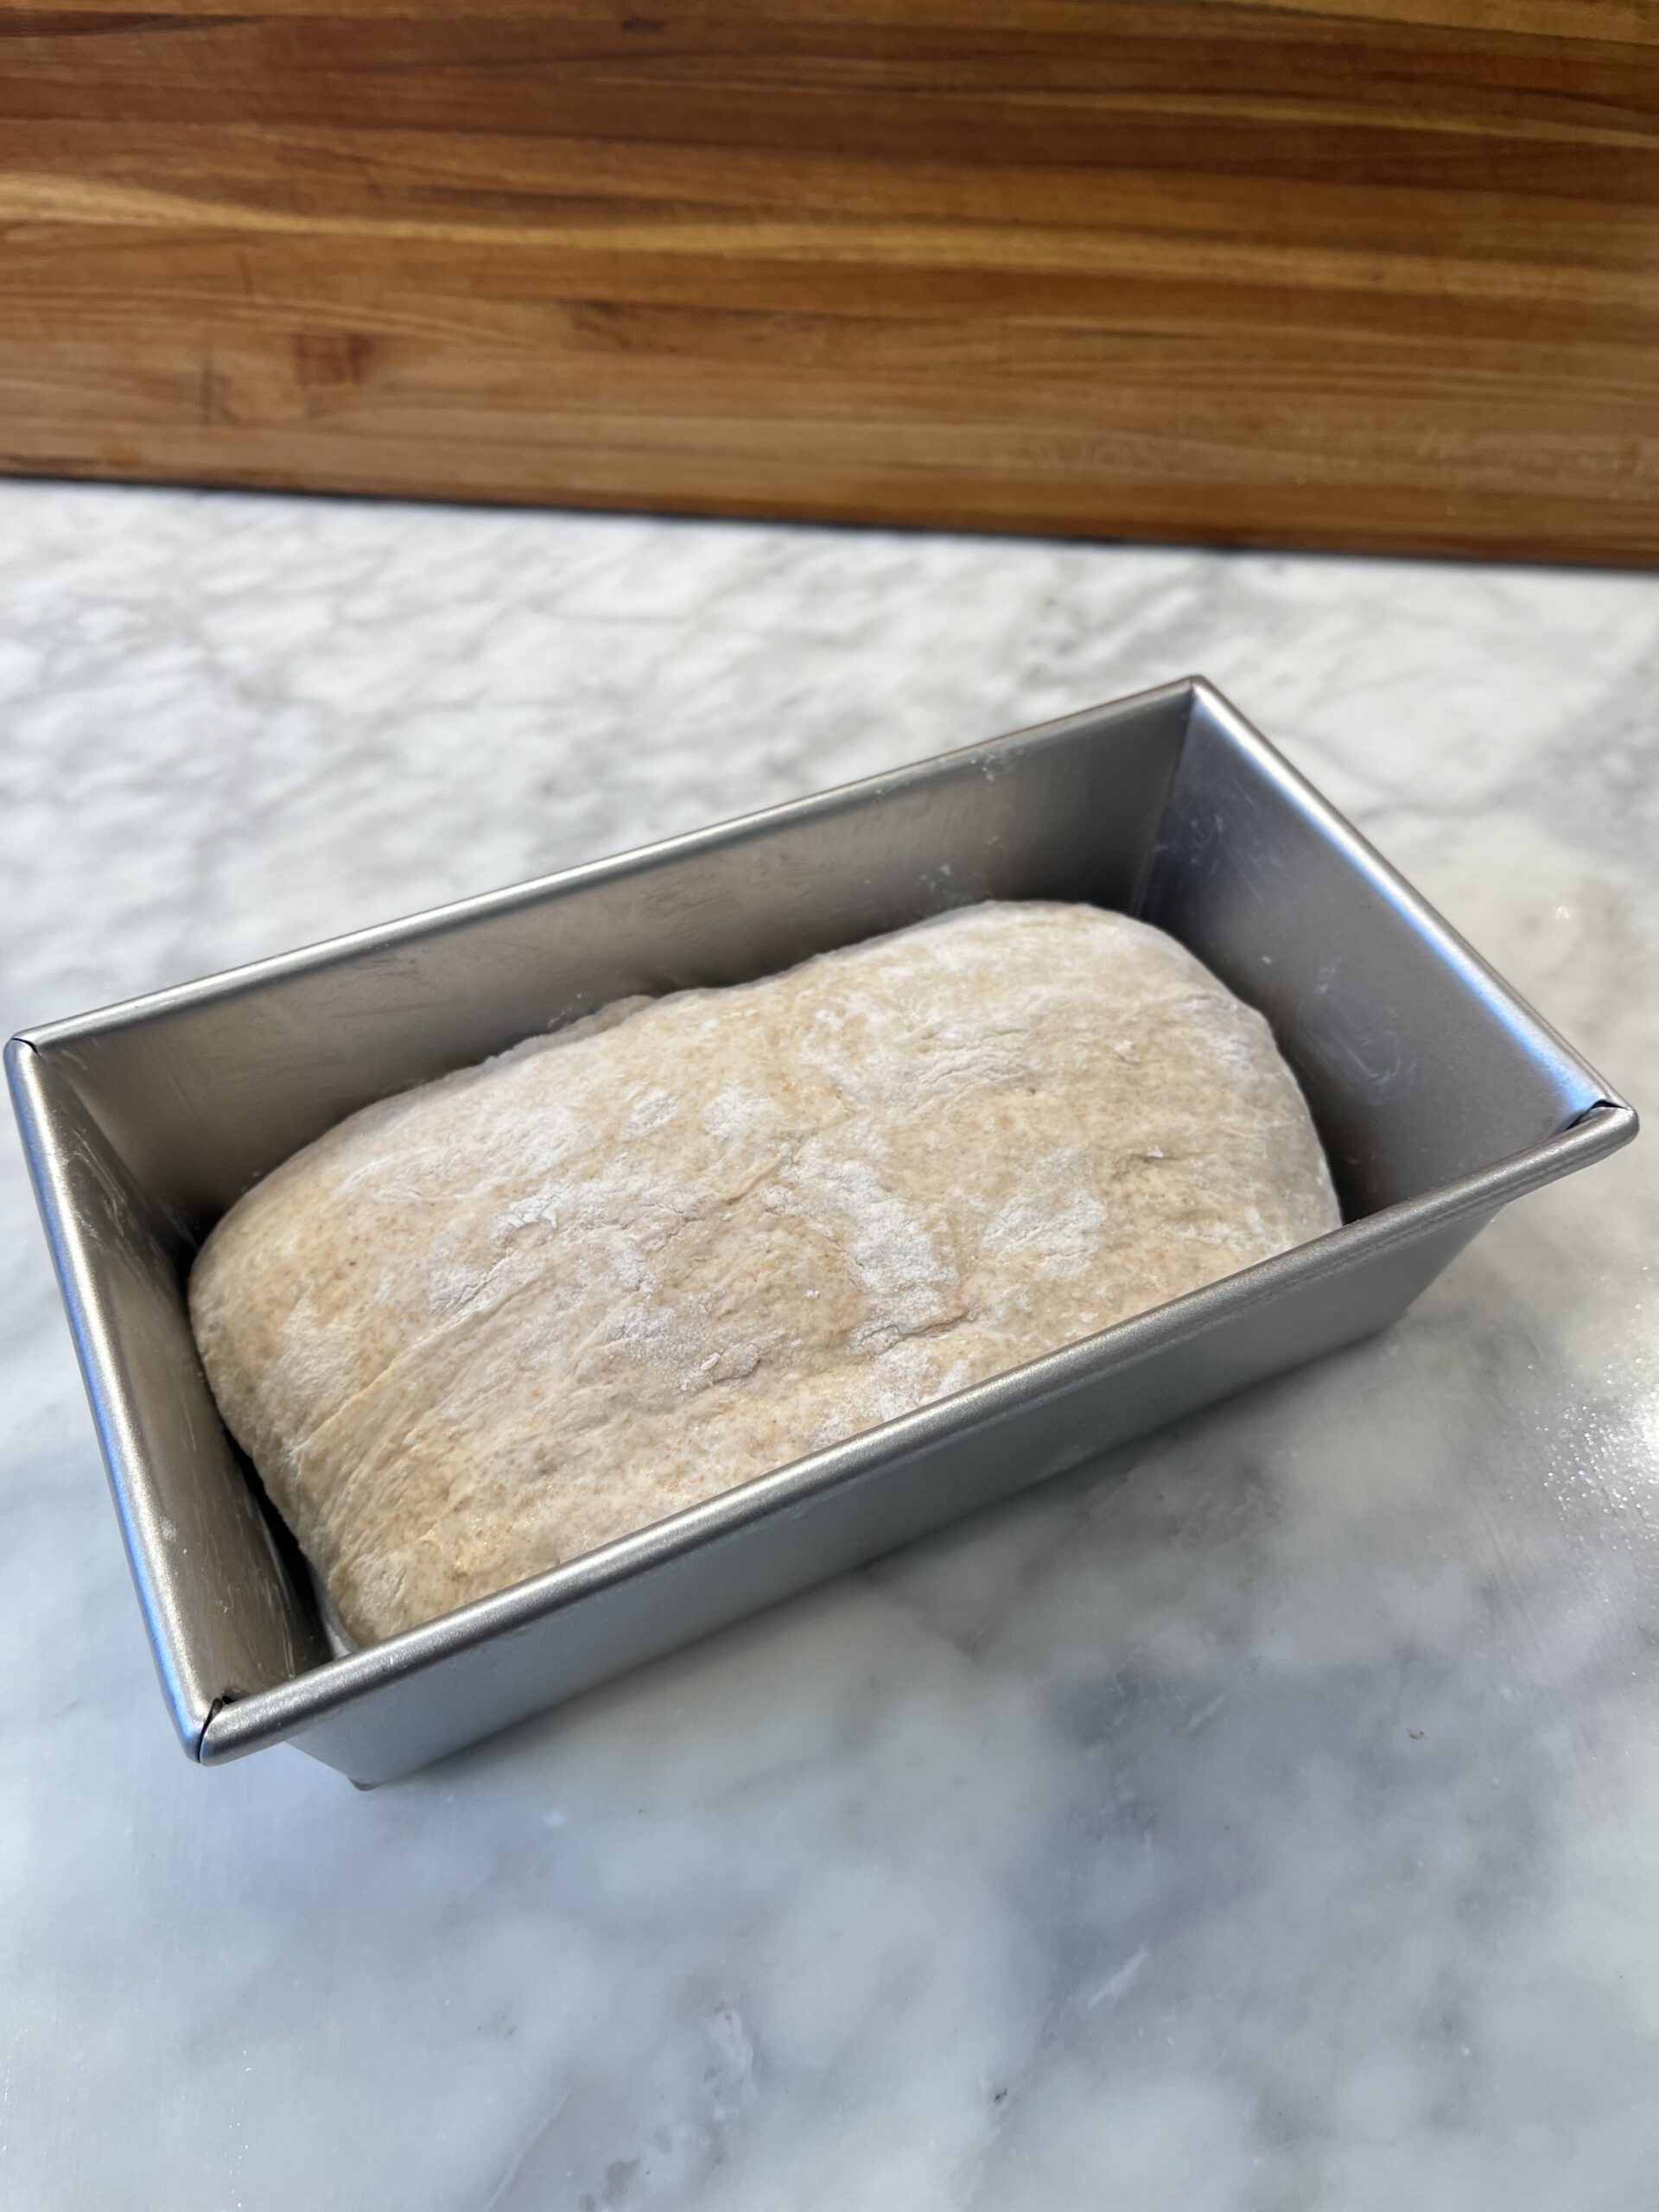 Photo of whole wheat sourdough sandwich dough, shaped in a metal pan before proofing.